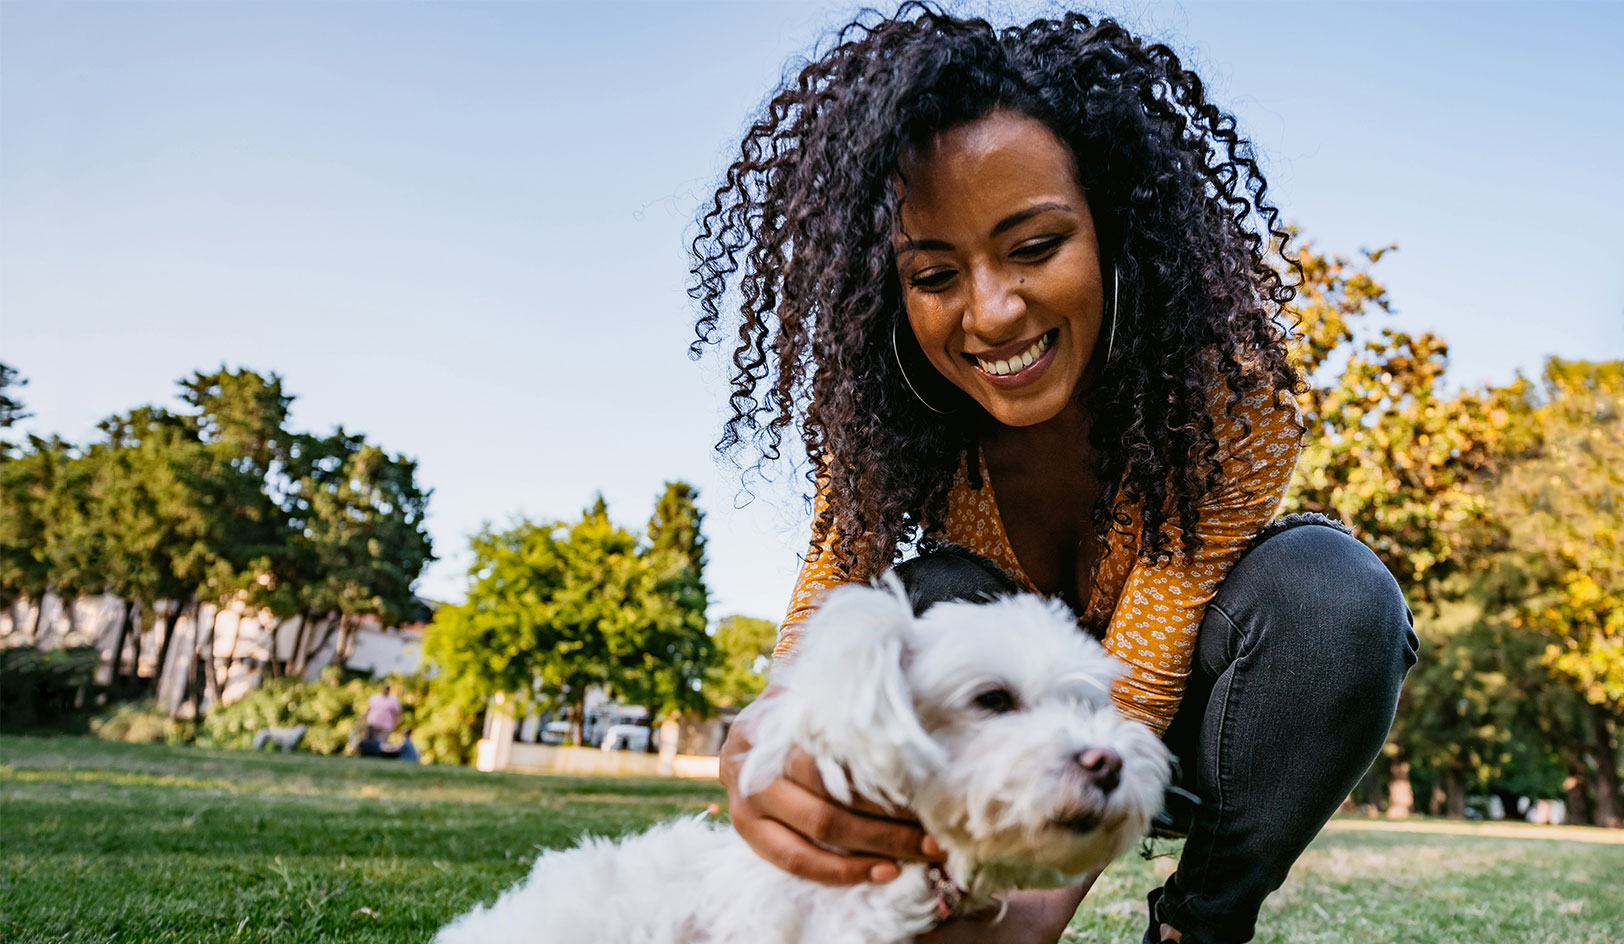 Woman kneeling in park petting small white dog